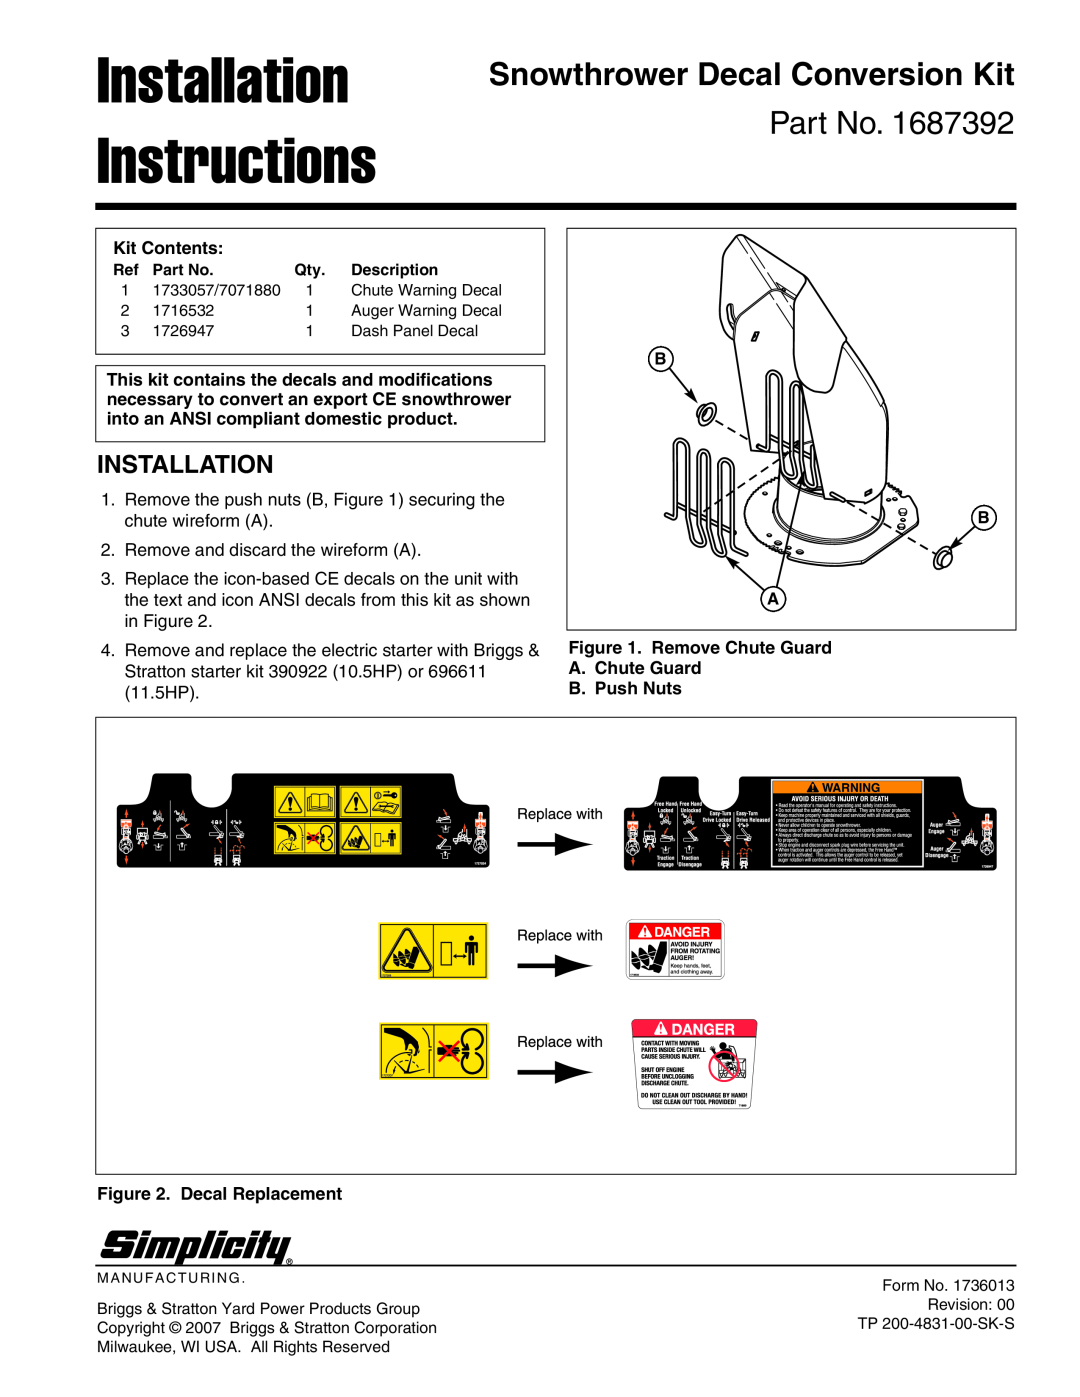 Simplicity 1726947 installation instructions Installation Instructions, Snowthrower Decal Conversion Kit, Kit Contents 